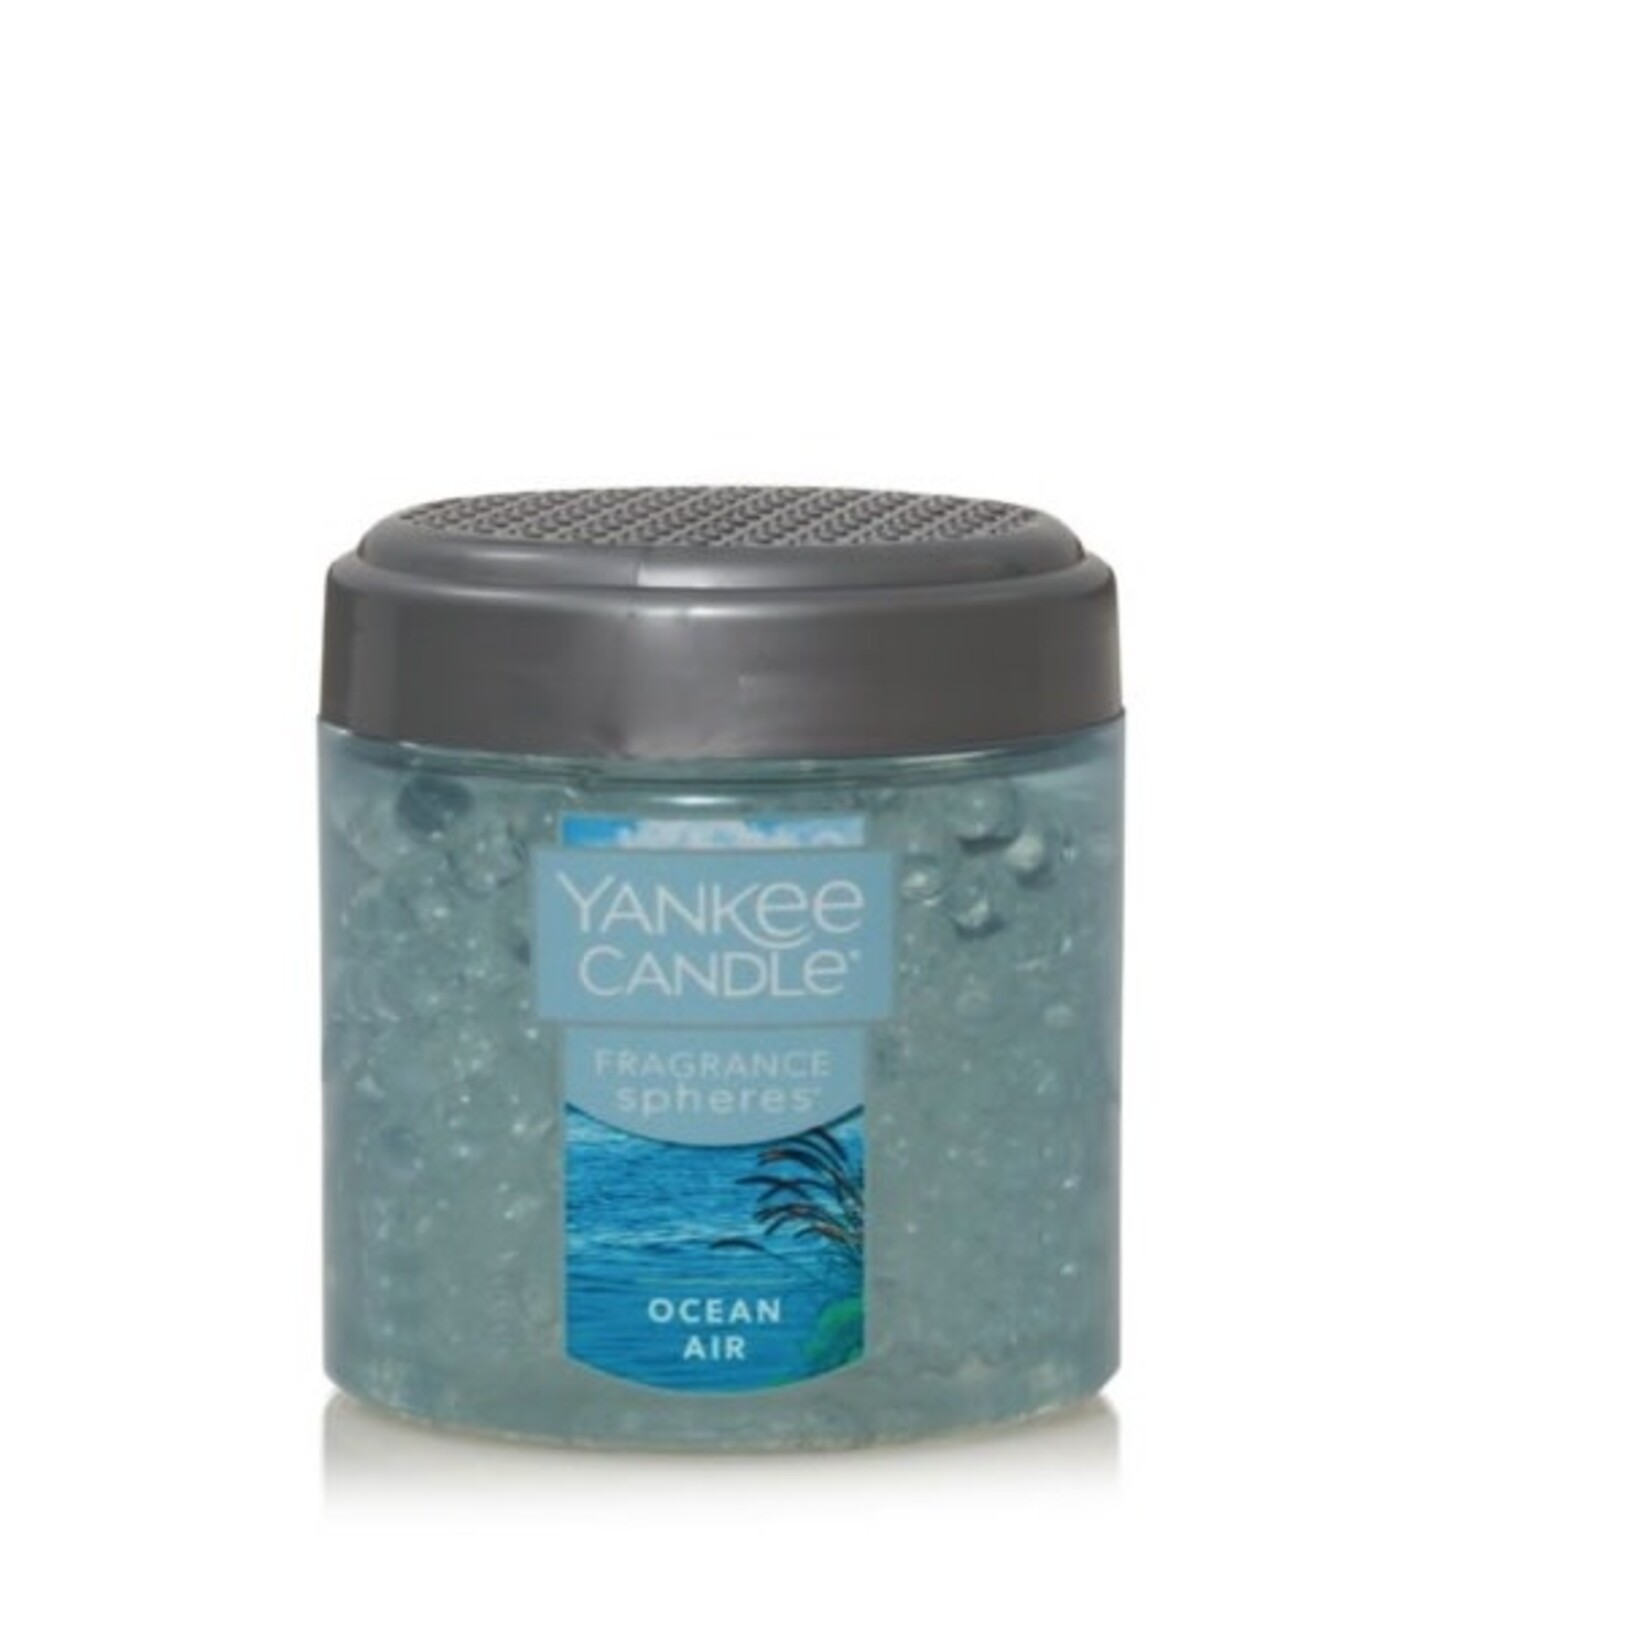 Yankee Candle Fragrance Spheres Odor Neutralizing Ocean Air Scent Beads -  CANDLE TIME